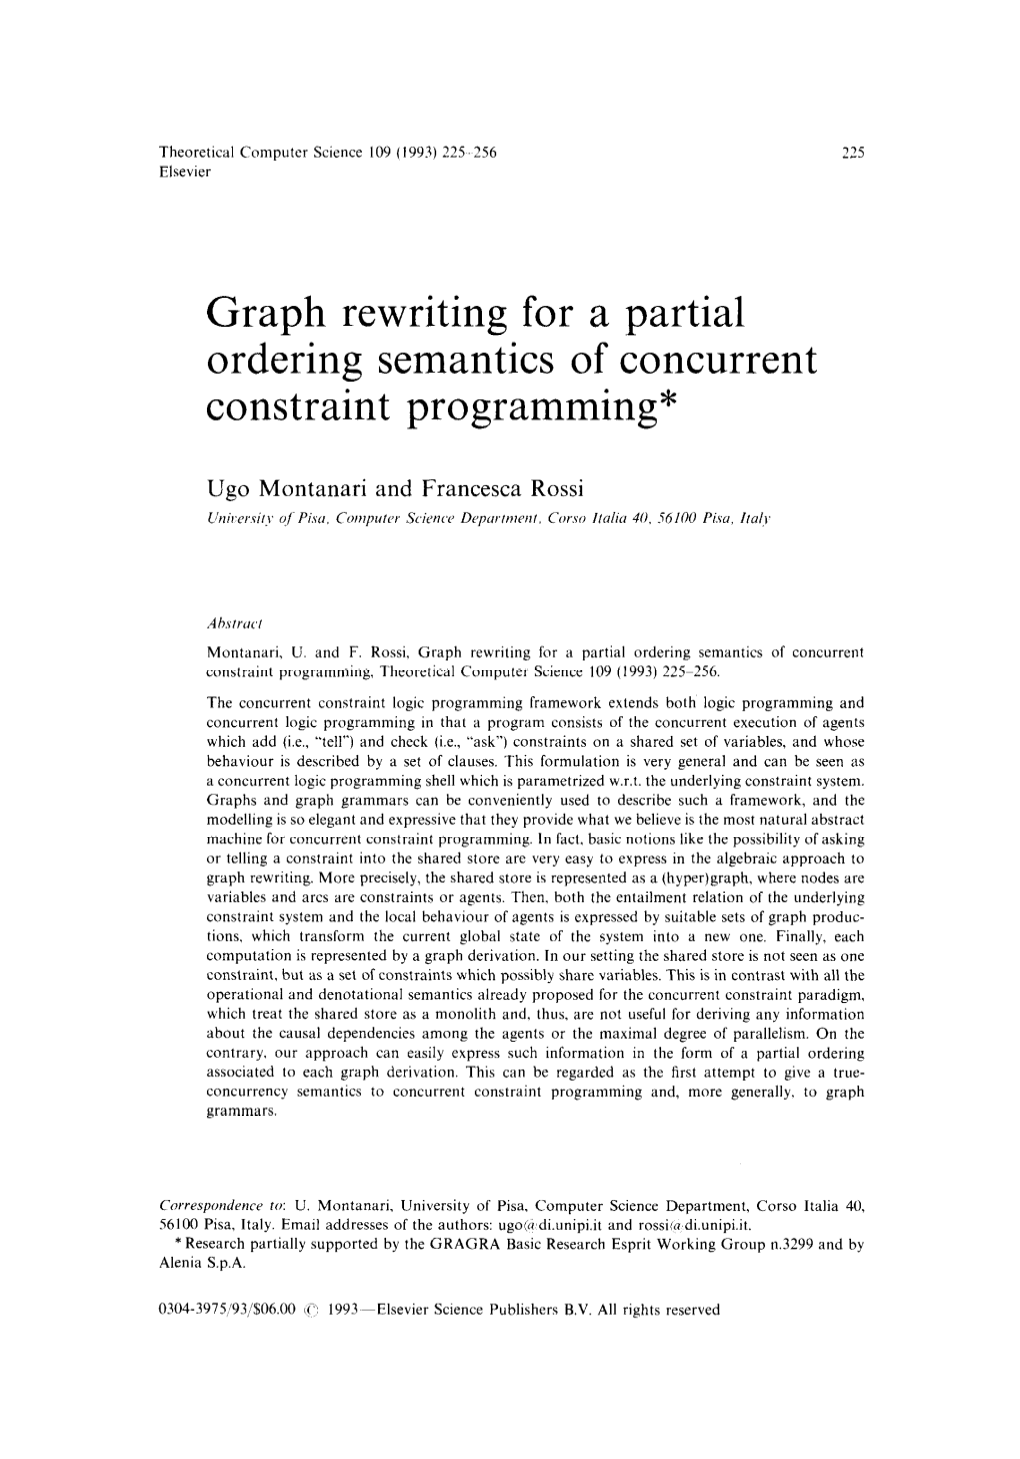 Graph Rewriting for a Partial Ordering Semantics of Concurrent Constraint Programming*